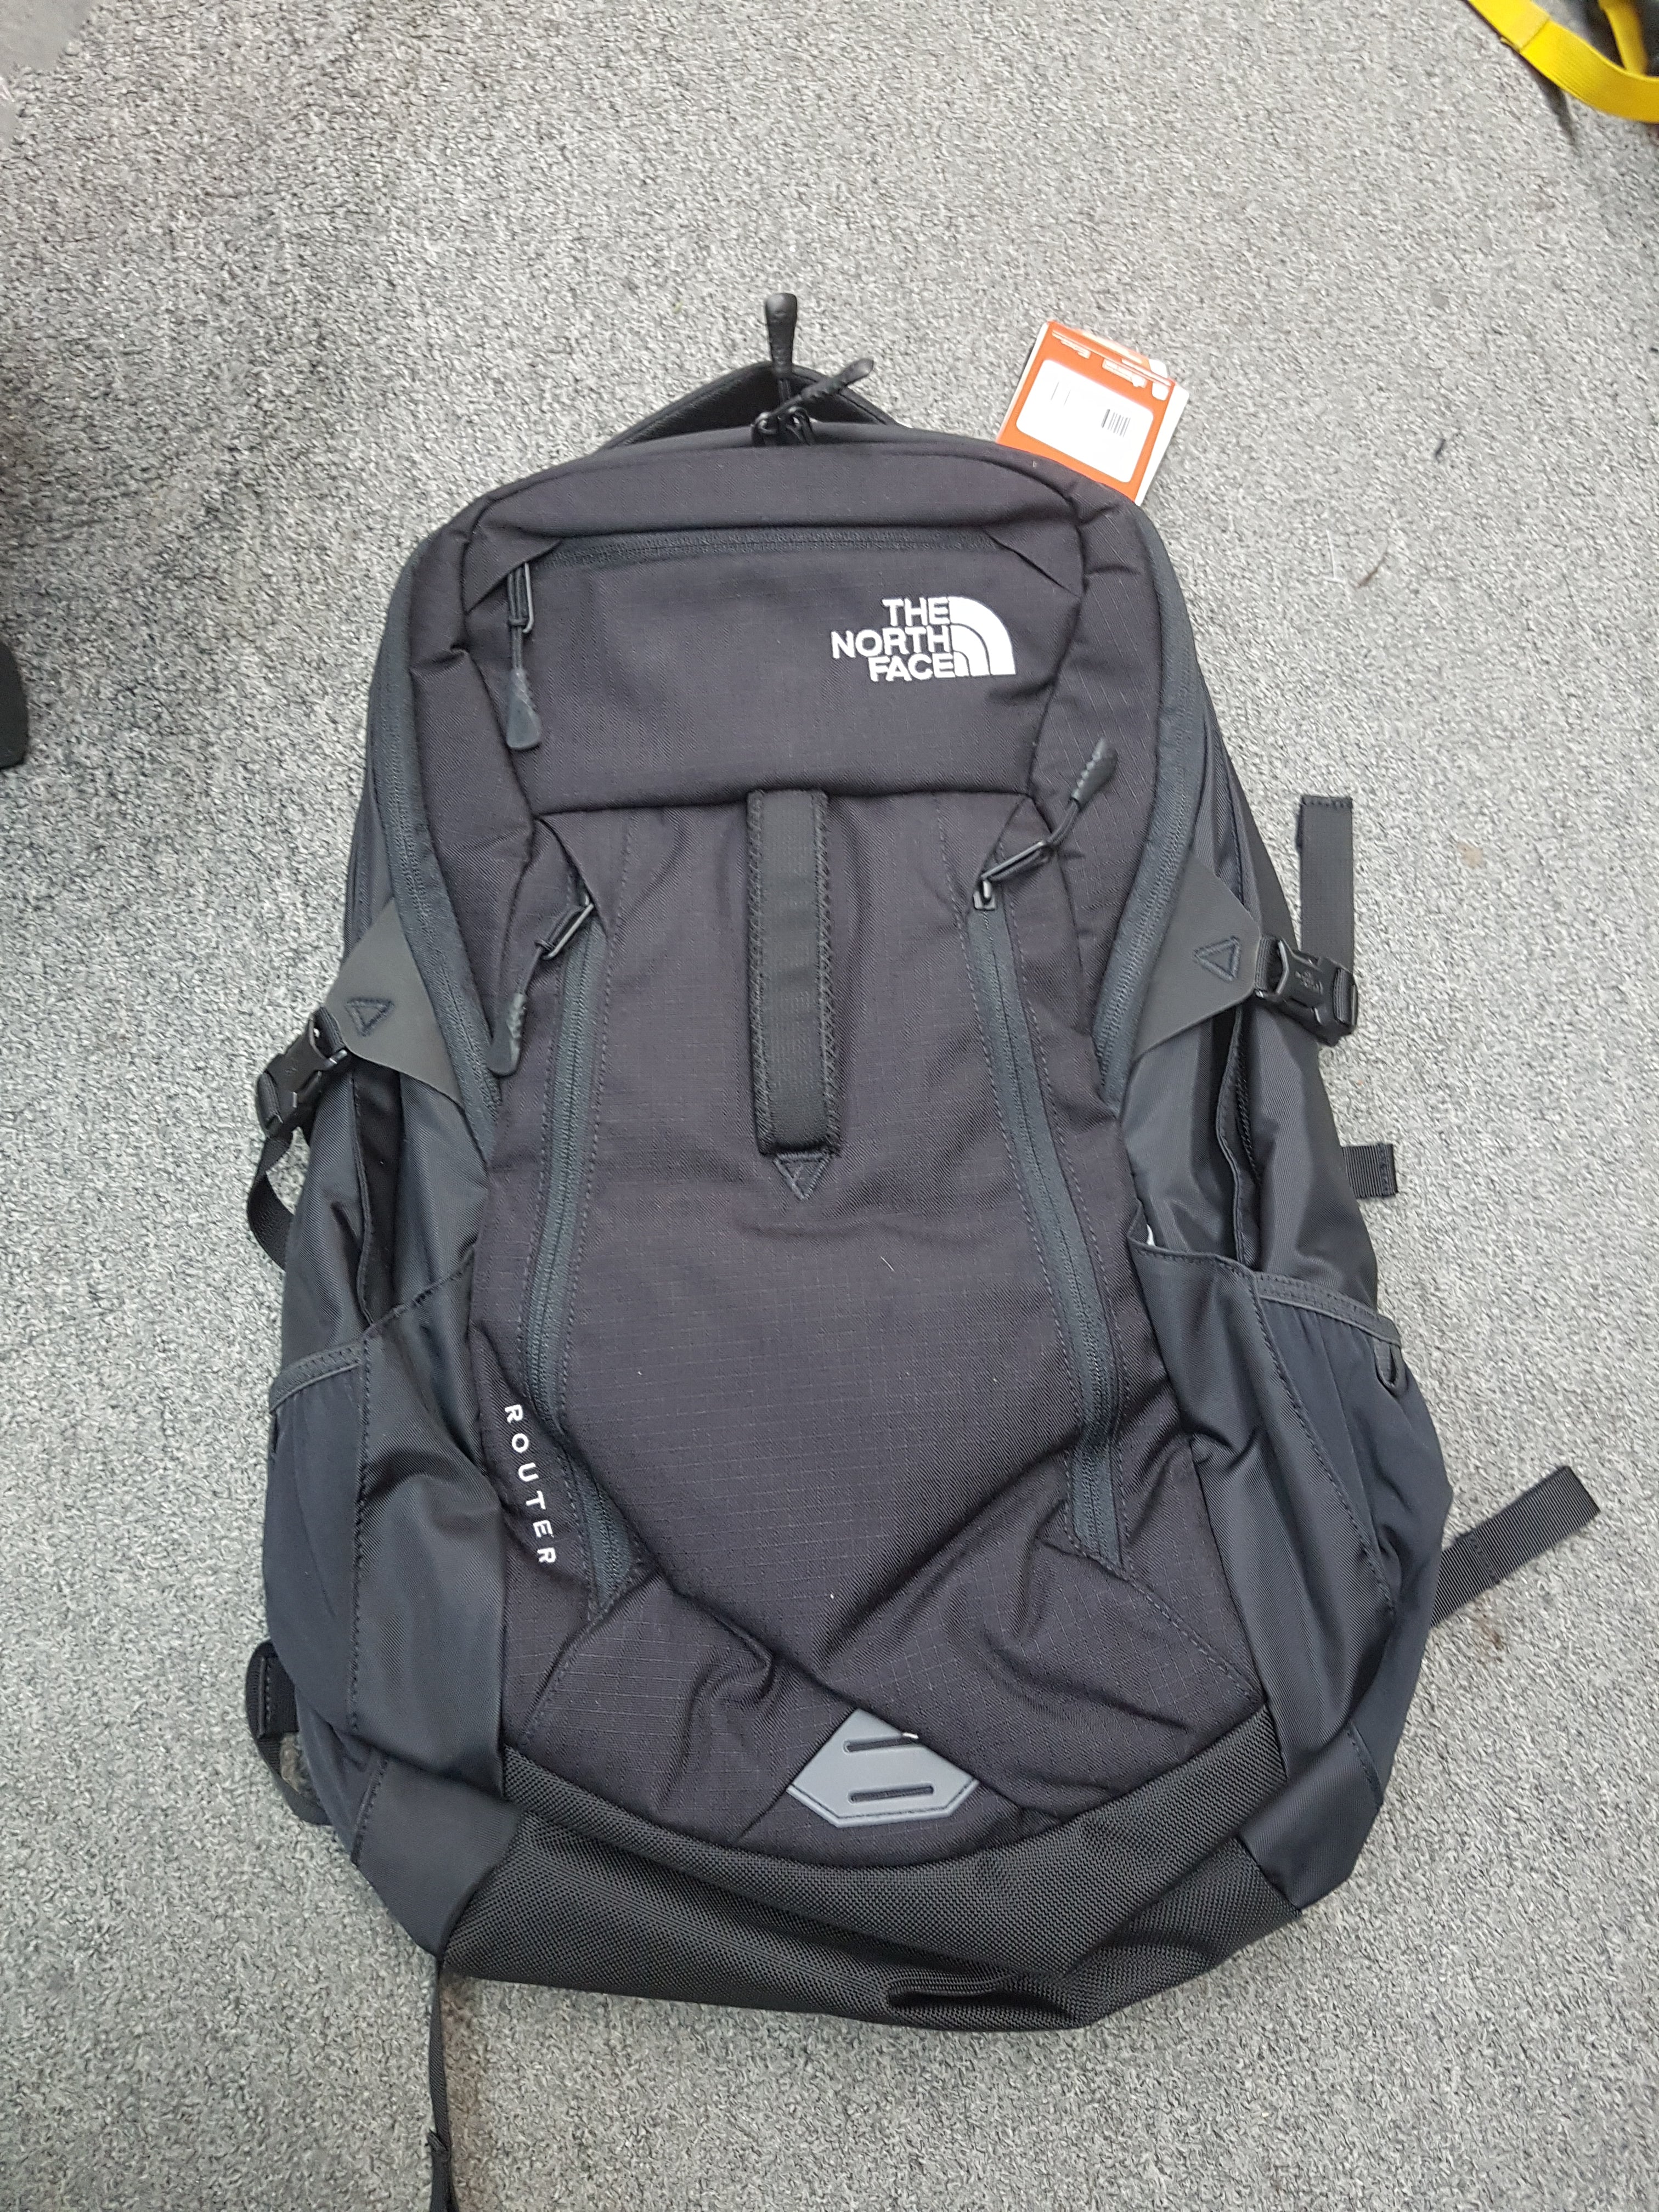 Northface Router 34L black - Backpackers Gallery backpacks bag